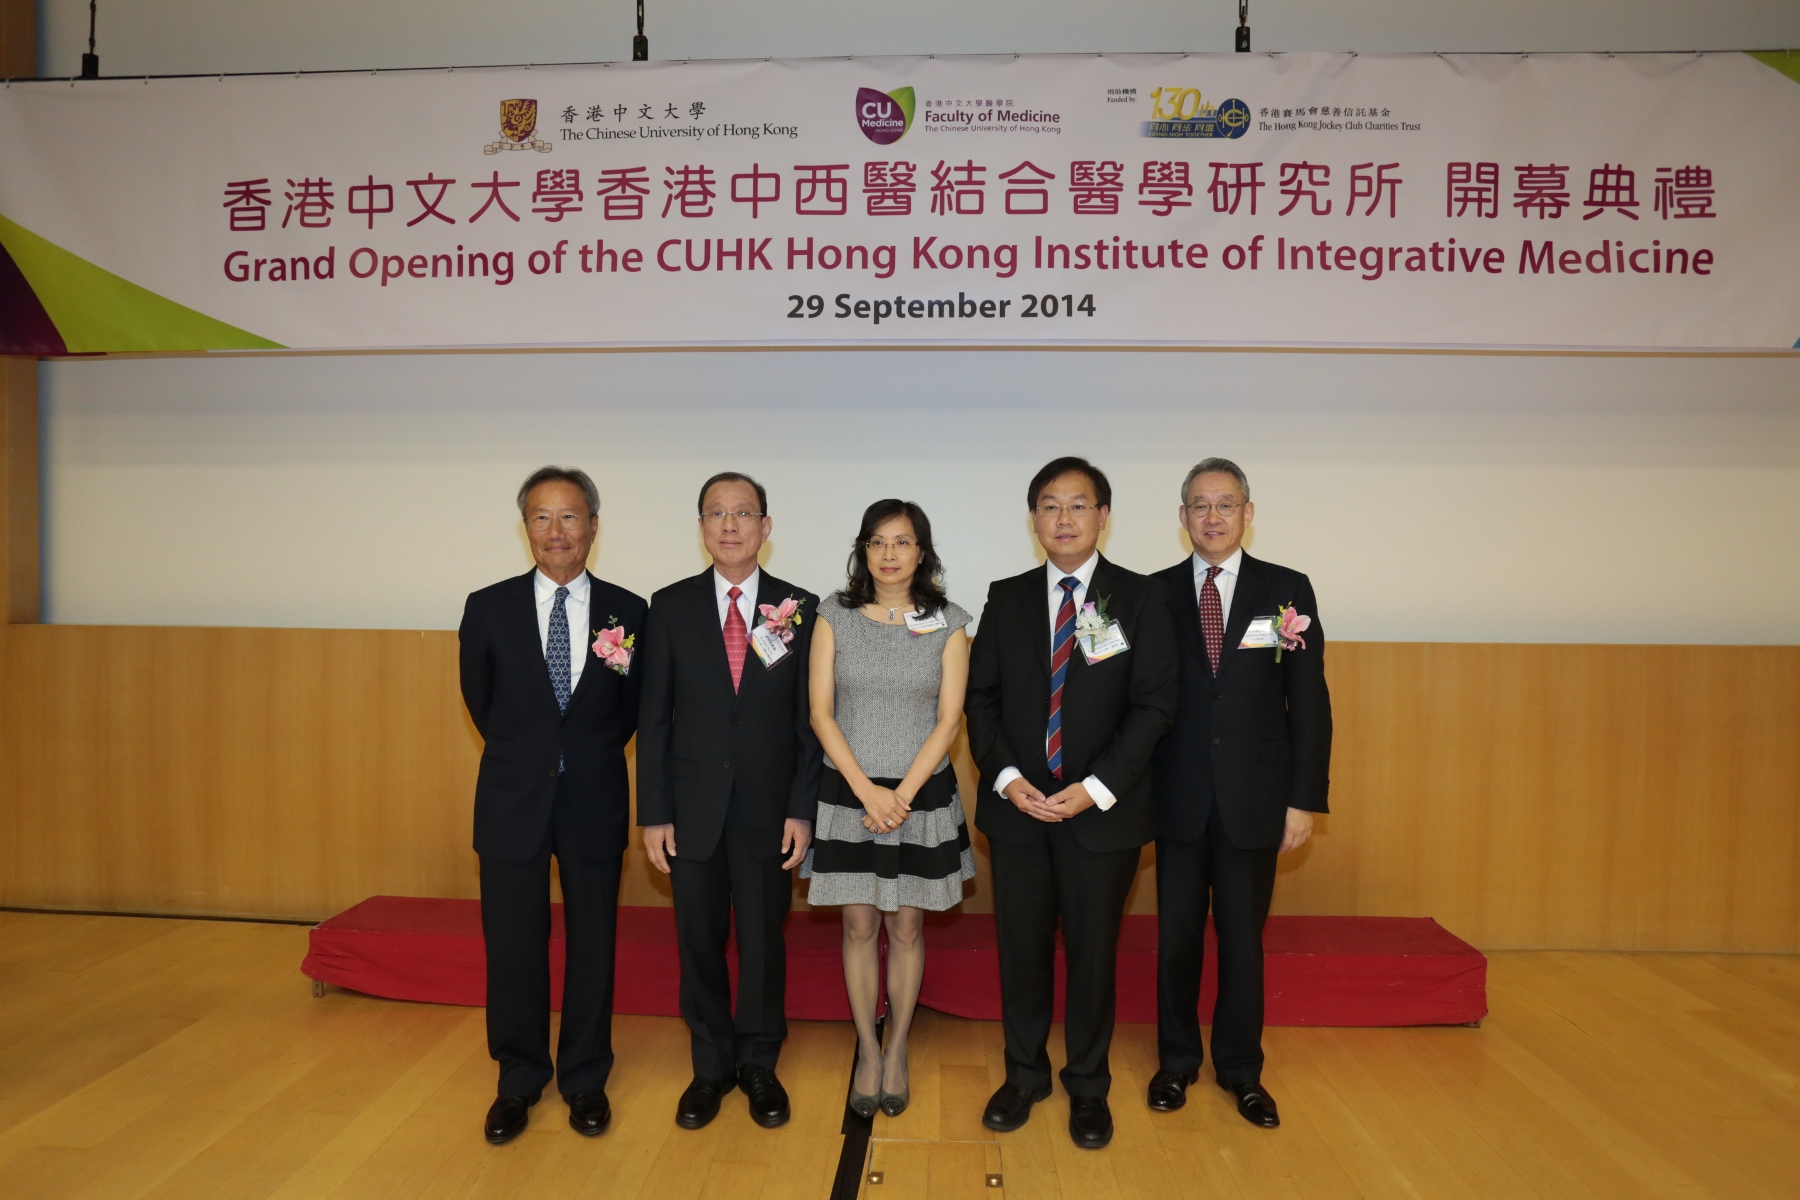 Prof Justin CY Wu, Director of HKIIM (2nd right) presents souvenirs